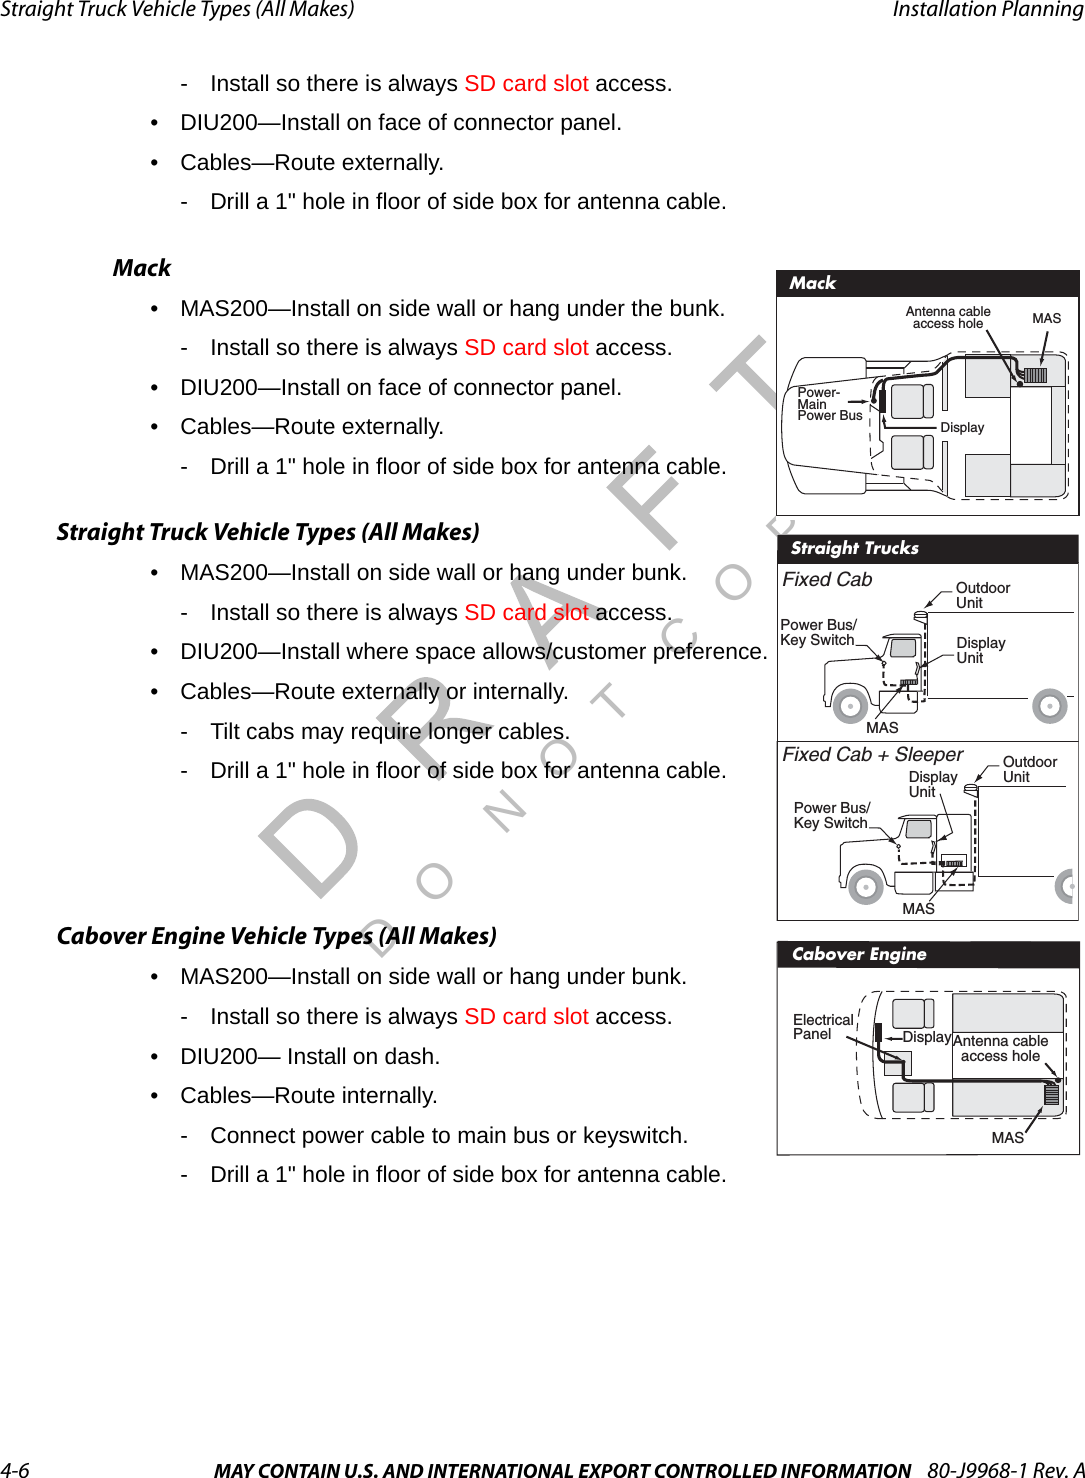 Straight Truck Vehicle Types (All Makes) Installation Planning4-6 MAY CONTAIN U.S. AND INTERNATIONAL EXPORT CONTROLLED INFORMATION 80-J9968-1 Rev. ADO NOT COPY- Install so there is always SD card slot access.•DIU200—Install on face of connector panel. • Cables—Route externally.- Drill a 1&quot; hole in floor of side box for antenna cable.Mack• MAS200—Install on side wall or hang under the bunk.- Install so there is always SD card slot access.•DIU200—Install on face of connector panel. • Cables—Route externally.- Drill a 1&quot; hole in floor of side box for antenna cable.Straight Truck Vehicle Types (All Makes)• MAS200—Install on side wall or hang under bunk.- Install so there is always SD card slot access.•DIU200—Install where space allows/customer preference.• Cables—Route externally or internally.- Tilt cabs may require longer cables.- Drill a 1&quot; hole in floor of side box for antenna cable.Cabover Engine Vehicle Types (All Makes)• MAS200—Install on side wall or hang under bunk.- Install so there is always SD card slot access.•DIU200— Install on dash.• Cables—Route internally.- Connect power cable to main bus or keyswitch.- Drill a 1&quot; hole in floor of side box for antenna cable.DisplayPower- MainPower BusAntenna cableaccess hole MASMackStraight TrucksFixed CabFixed Cab + Sleeper OutdoorUnitOutdoorUnitDisplayUnitDisplayUnitMASPower Bus/Key SwitchPower Bus/Key SwitchMASMASAntenna cableaccess holeDisplayElectricalPanelCabover Engine